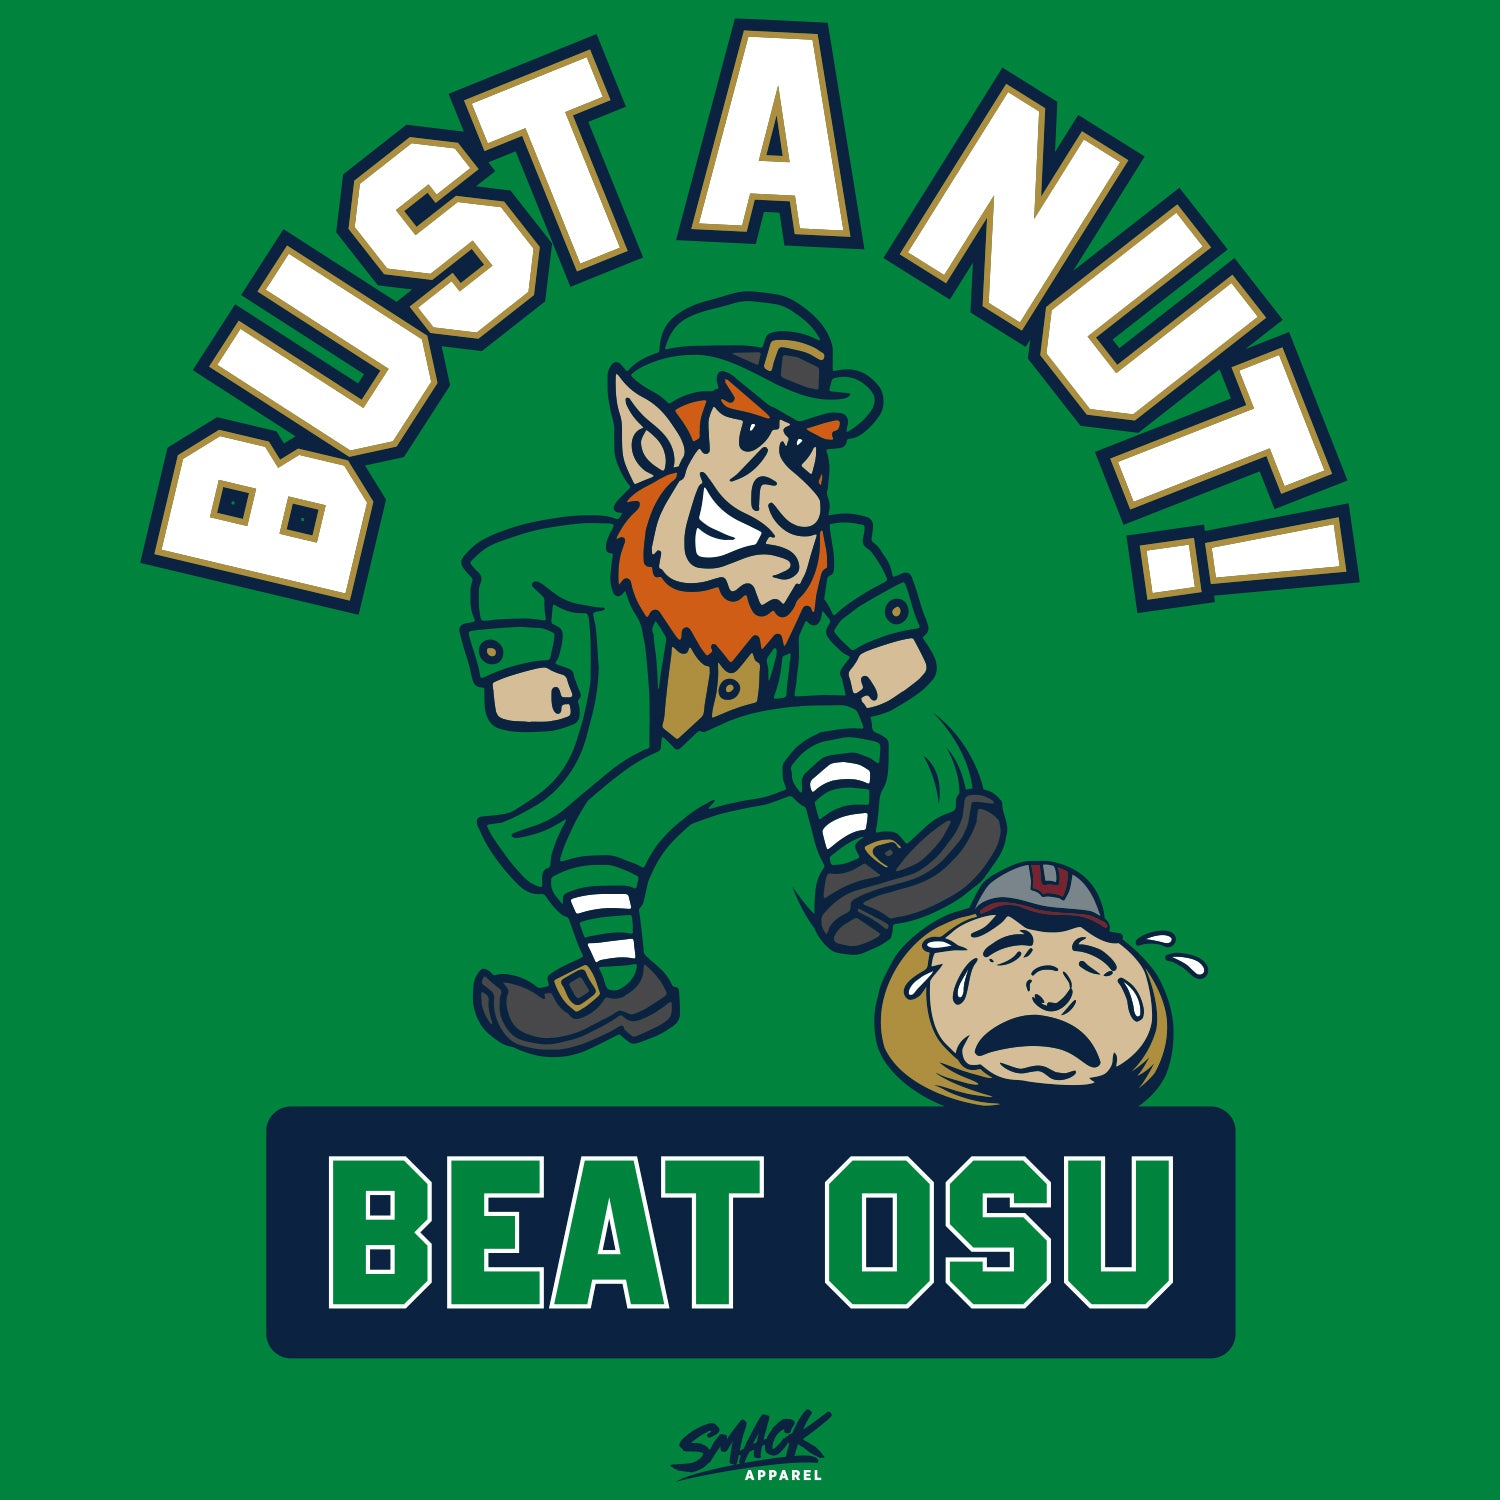 Bust A Nut! Beat Ohio State (Blue/Maize) T-Shirt for Michigan College Fans (SM-5XL) Short Sleeve / Maize / Small